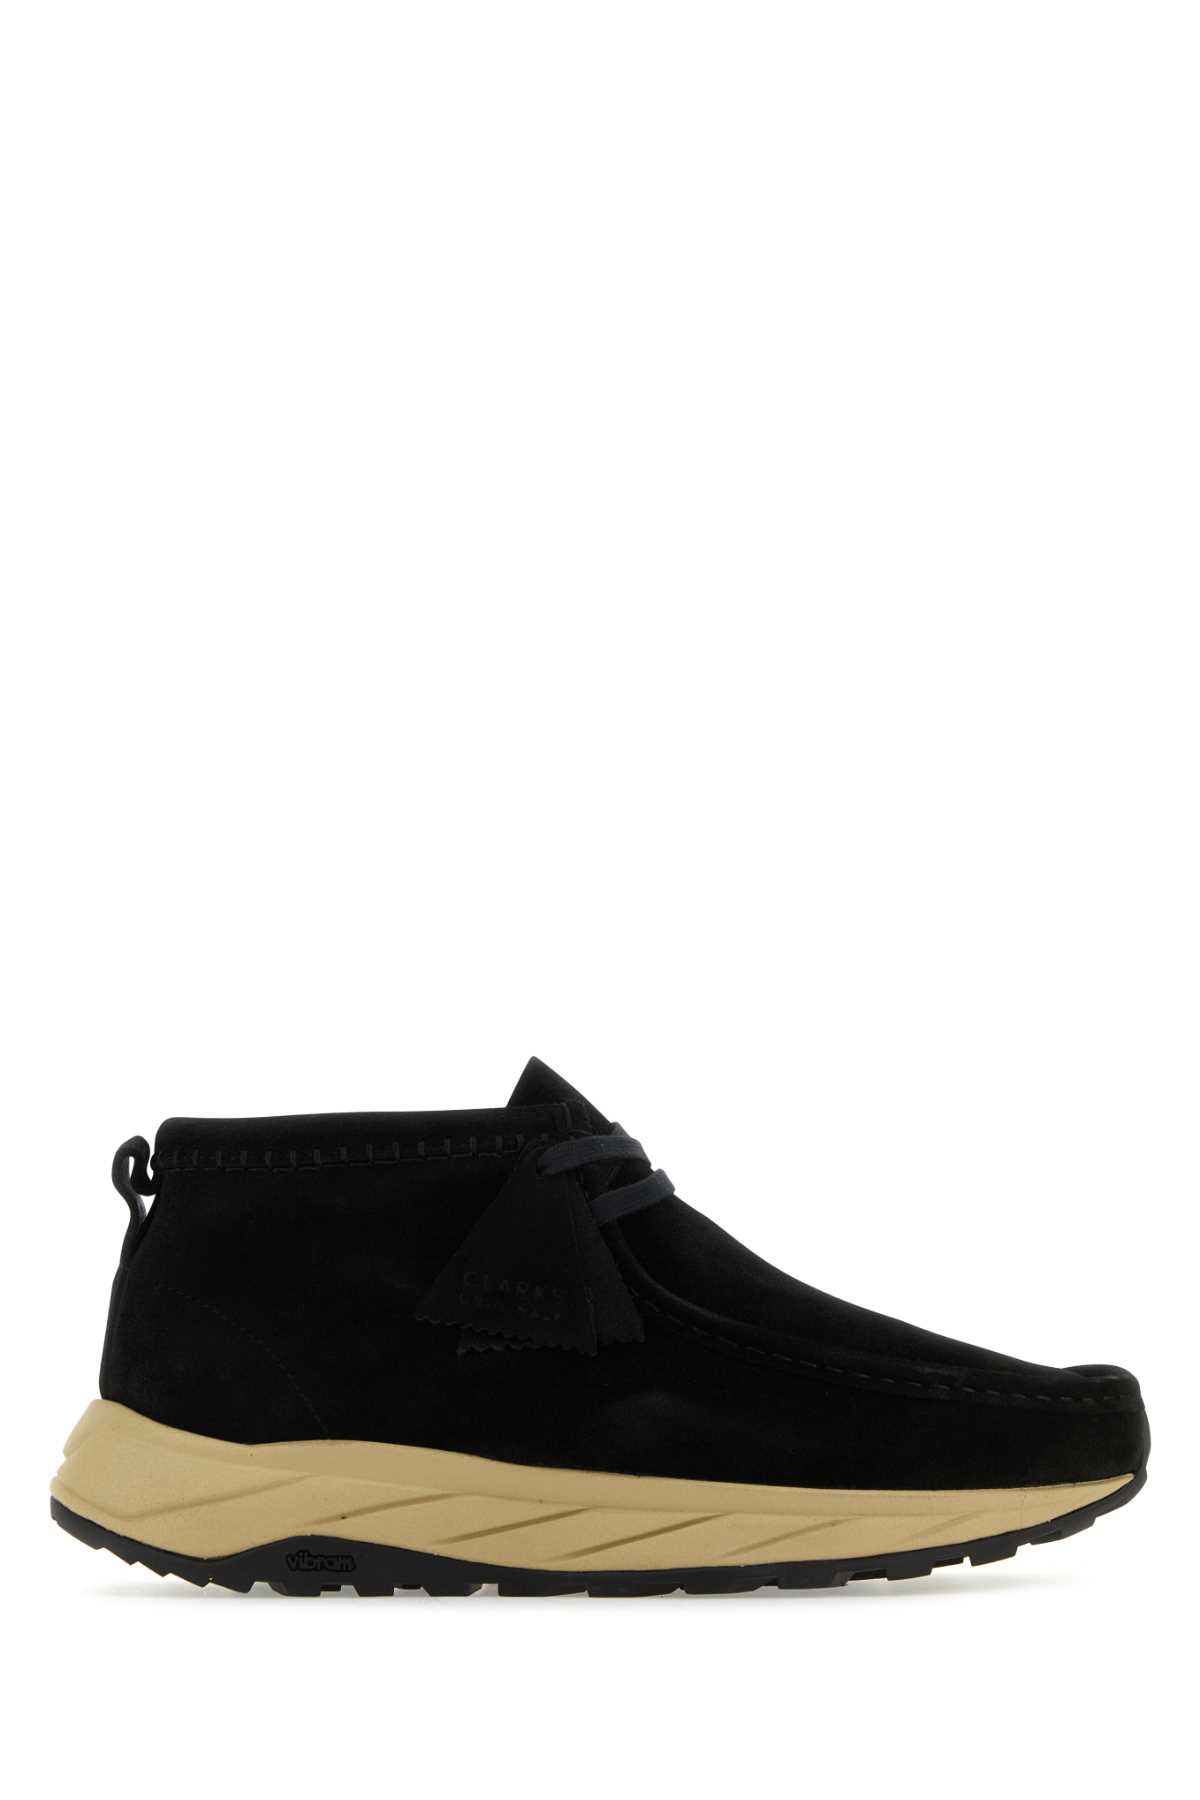 Black Suede Wallabee Eden Ankle Boots